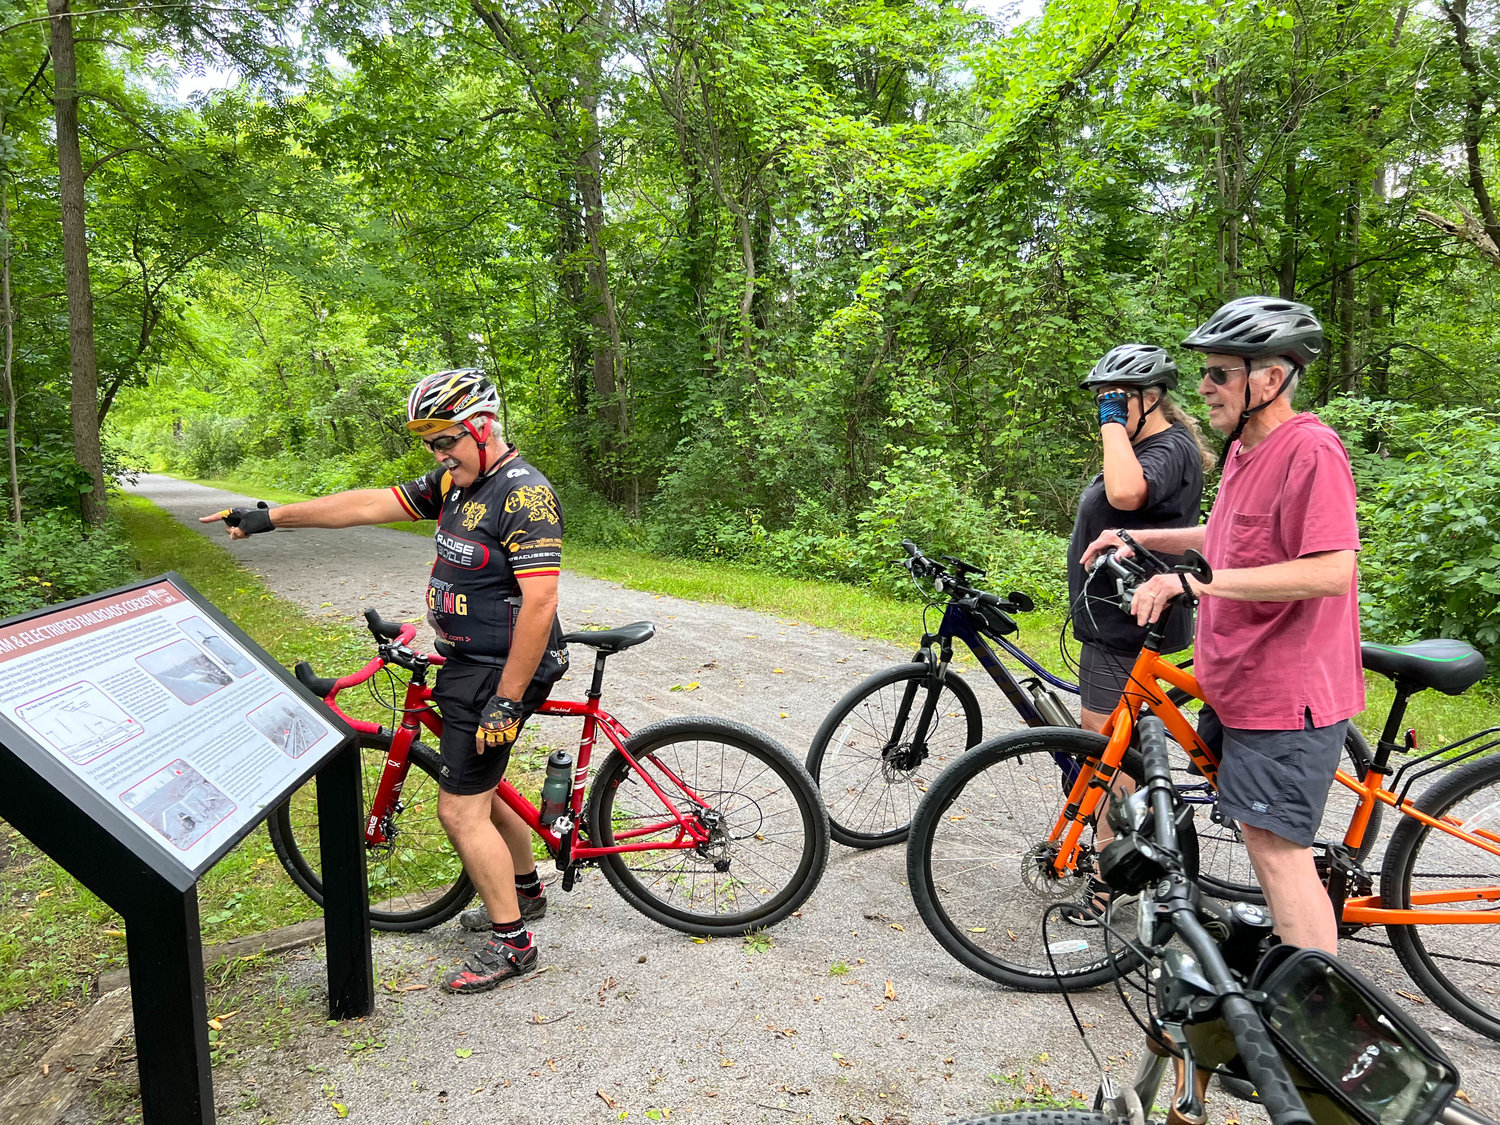 Joe Magliocca (far left) of the Oneida Improvement Committee guides a historic bike tour connecting the Oneida Rail Trail with the Erie Canalway Trail on Tuesday, July 12, 2022.